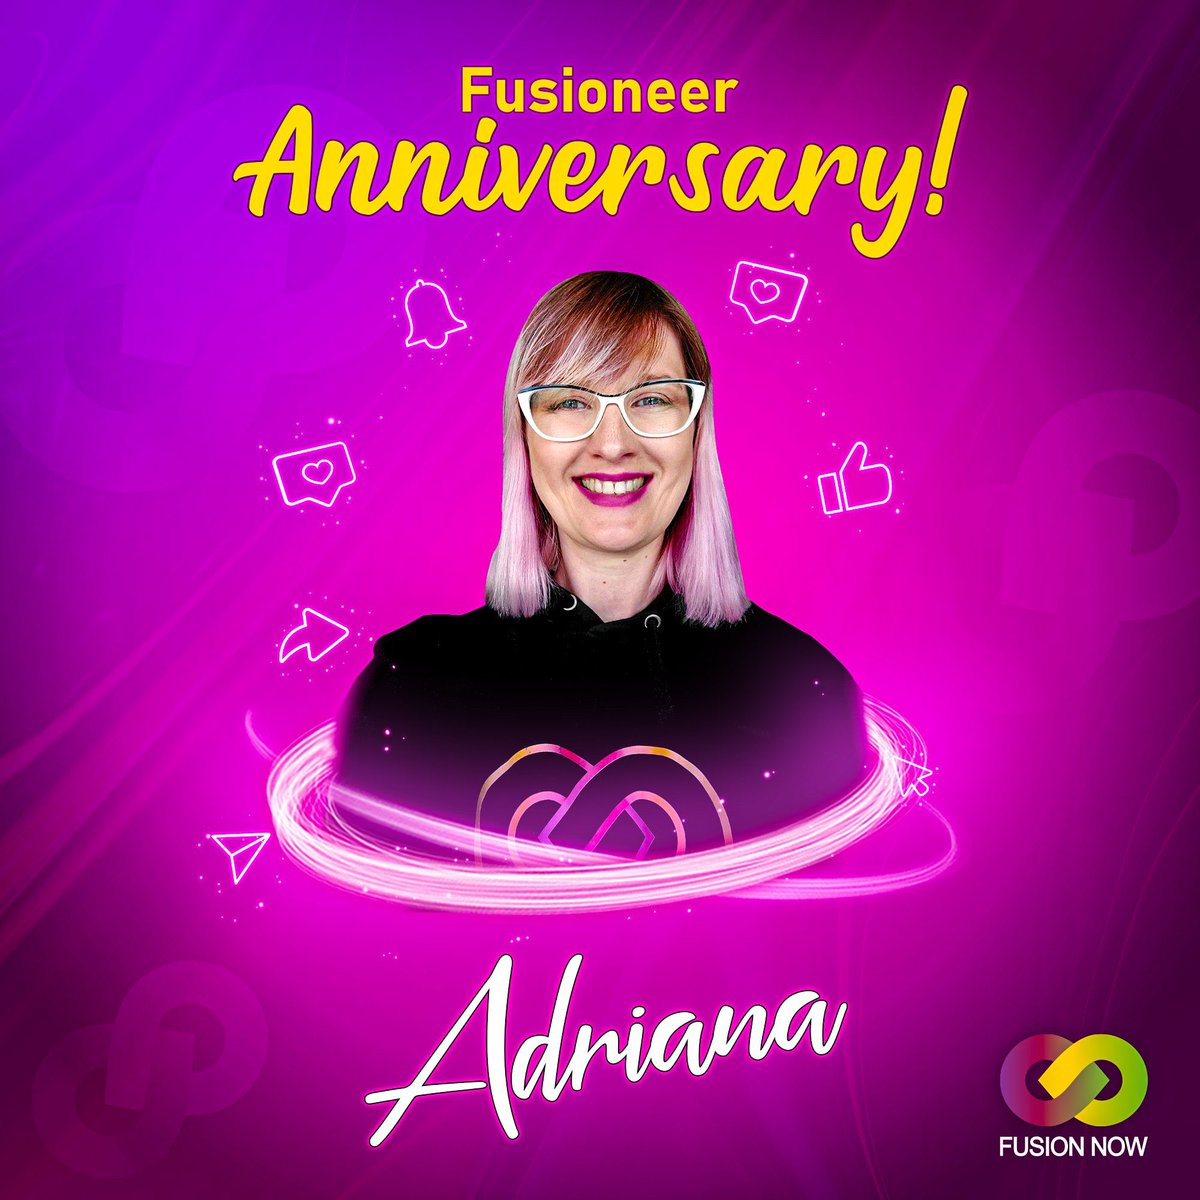 Today, we're celebrating a 2nd Fusioneer Work Anniversary🎂

Adriana creates 2.6 videos and 3 graphics daily, on average 😱 Across all clients, these graphics maintain a unique tone amongst competitors!

#FusionNow #CelebrateFusioneers #HappyWorkAnniversary